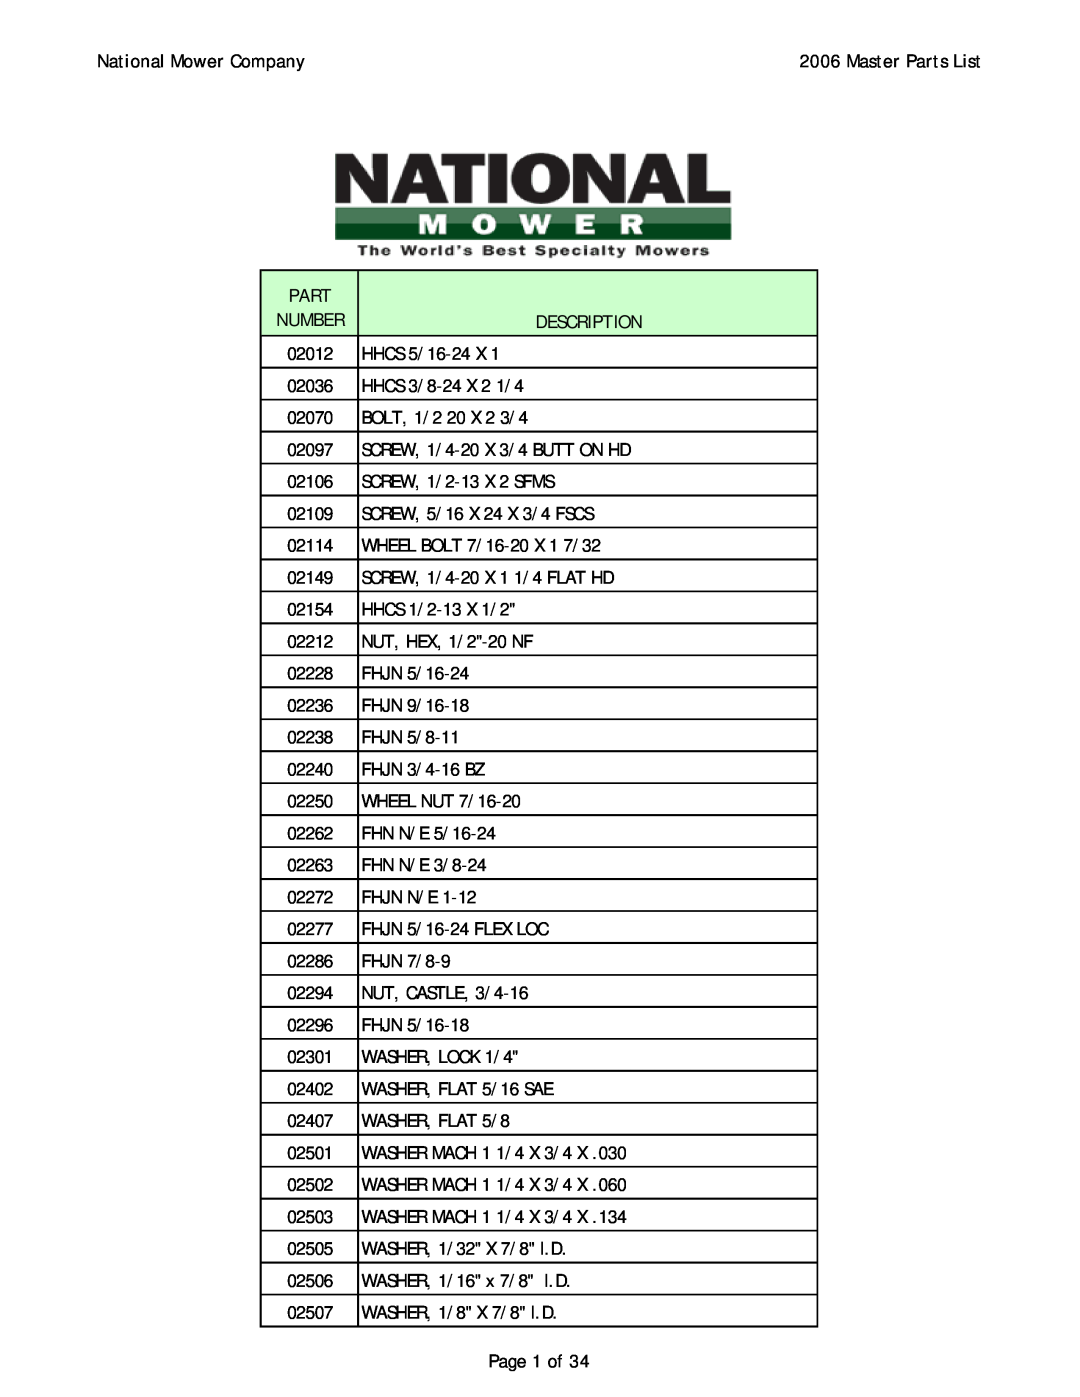 National Mower 02502, 02507, 02501, 02402, 02407, 02301 manual National Mower Company, Part, Number, Description, Page 1 of 